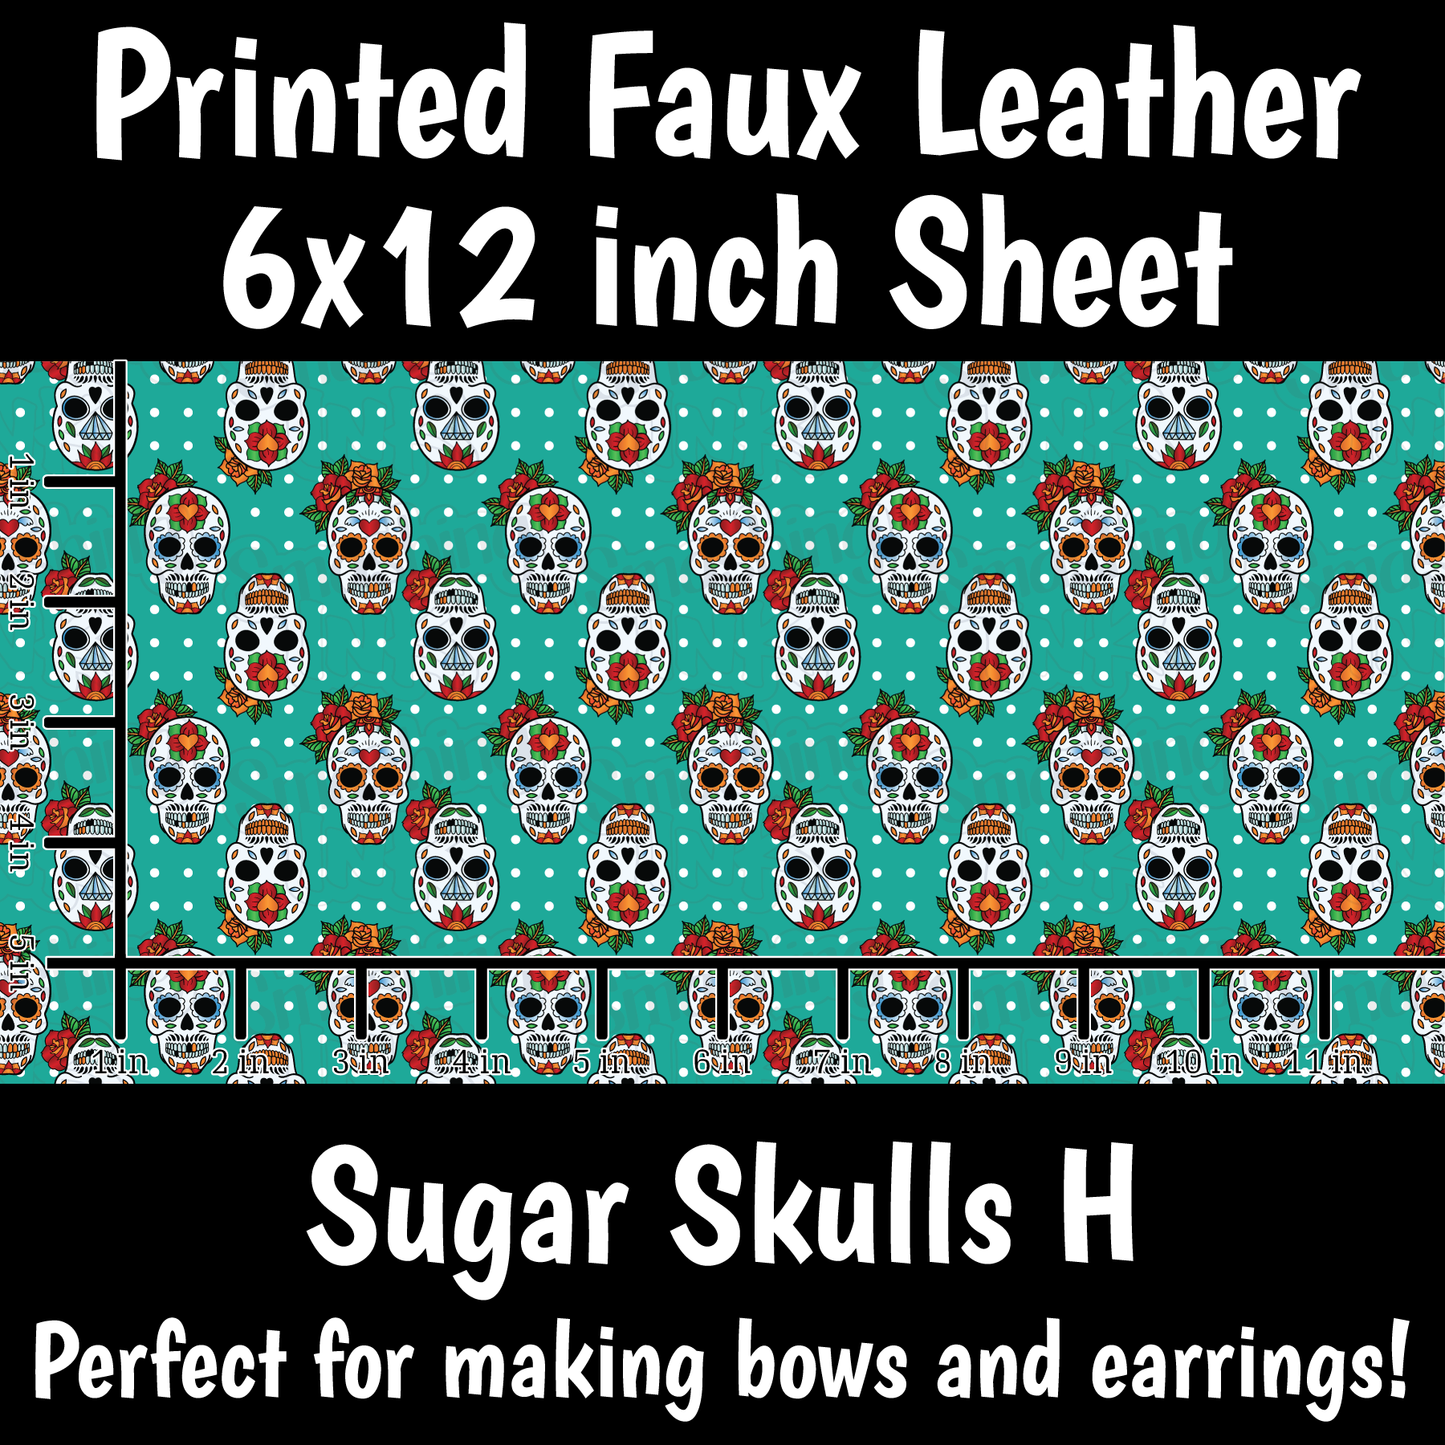 Sugar Skulls H - Faux Leather Sheet (SHIPS IN 3 BUS DAYS)